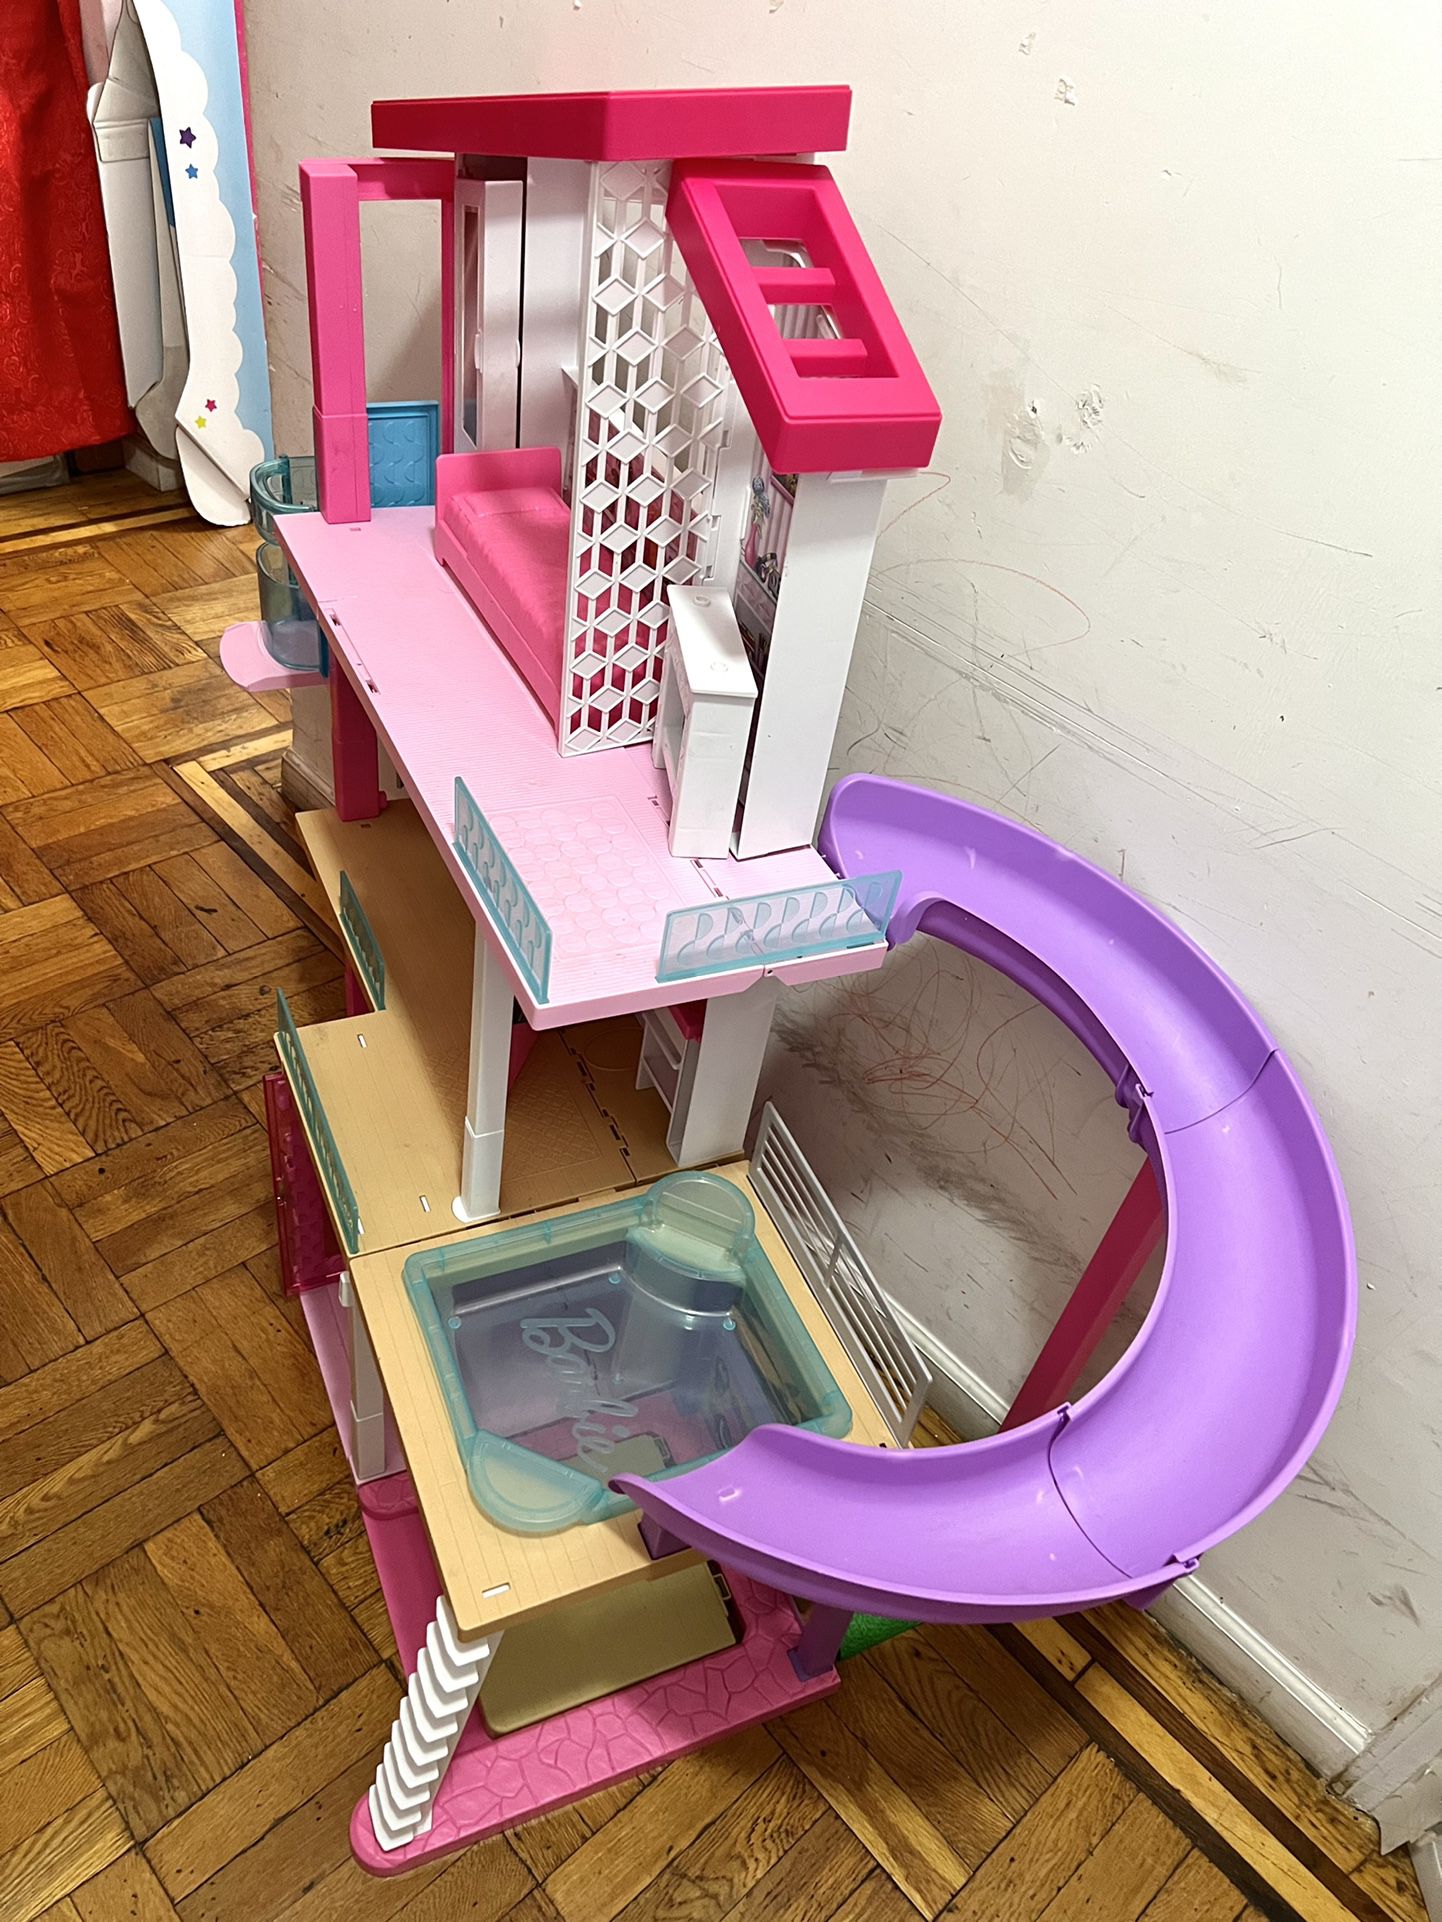 Barbie Dream house Doll House With Pool, Side, Elevator, Lights And Sounds  for Sale in Saint Paul, MN - OfferUp